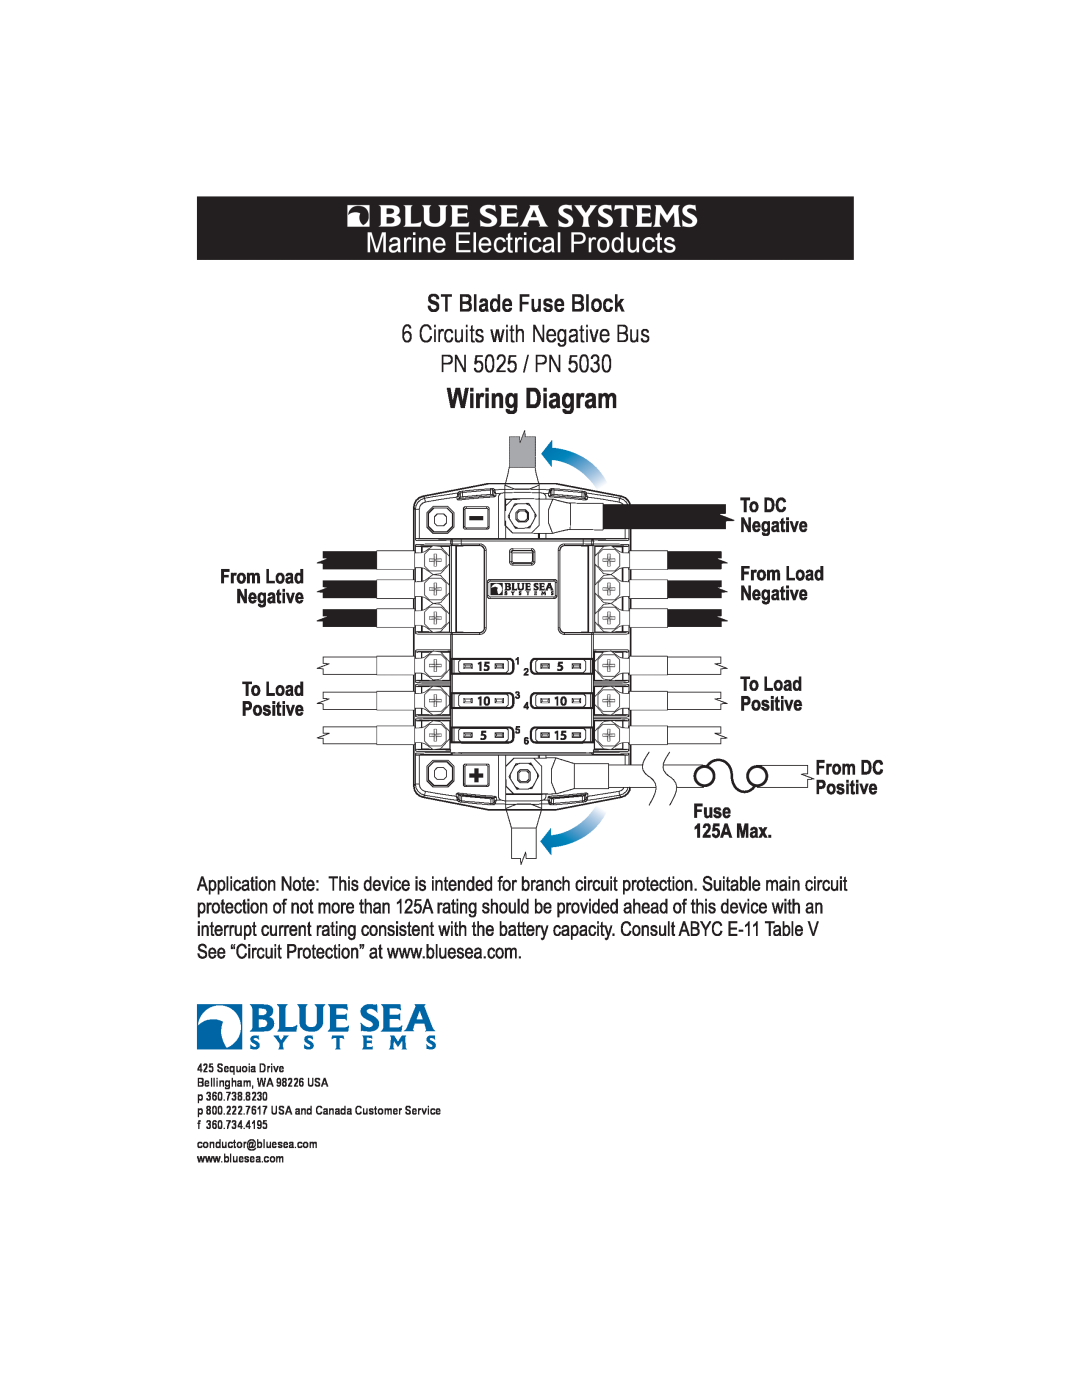 Blue Sea Systems manual Marine Electrical Products, ST Blade Fuse Block, Circuits with Negative Bus PN 5025 / PN 